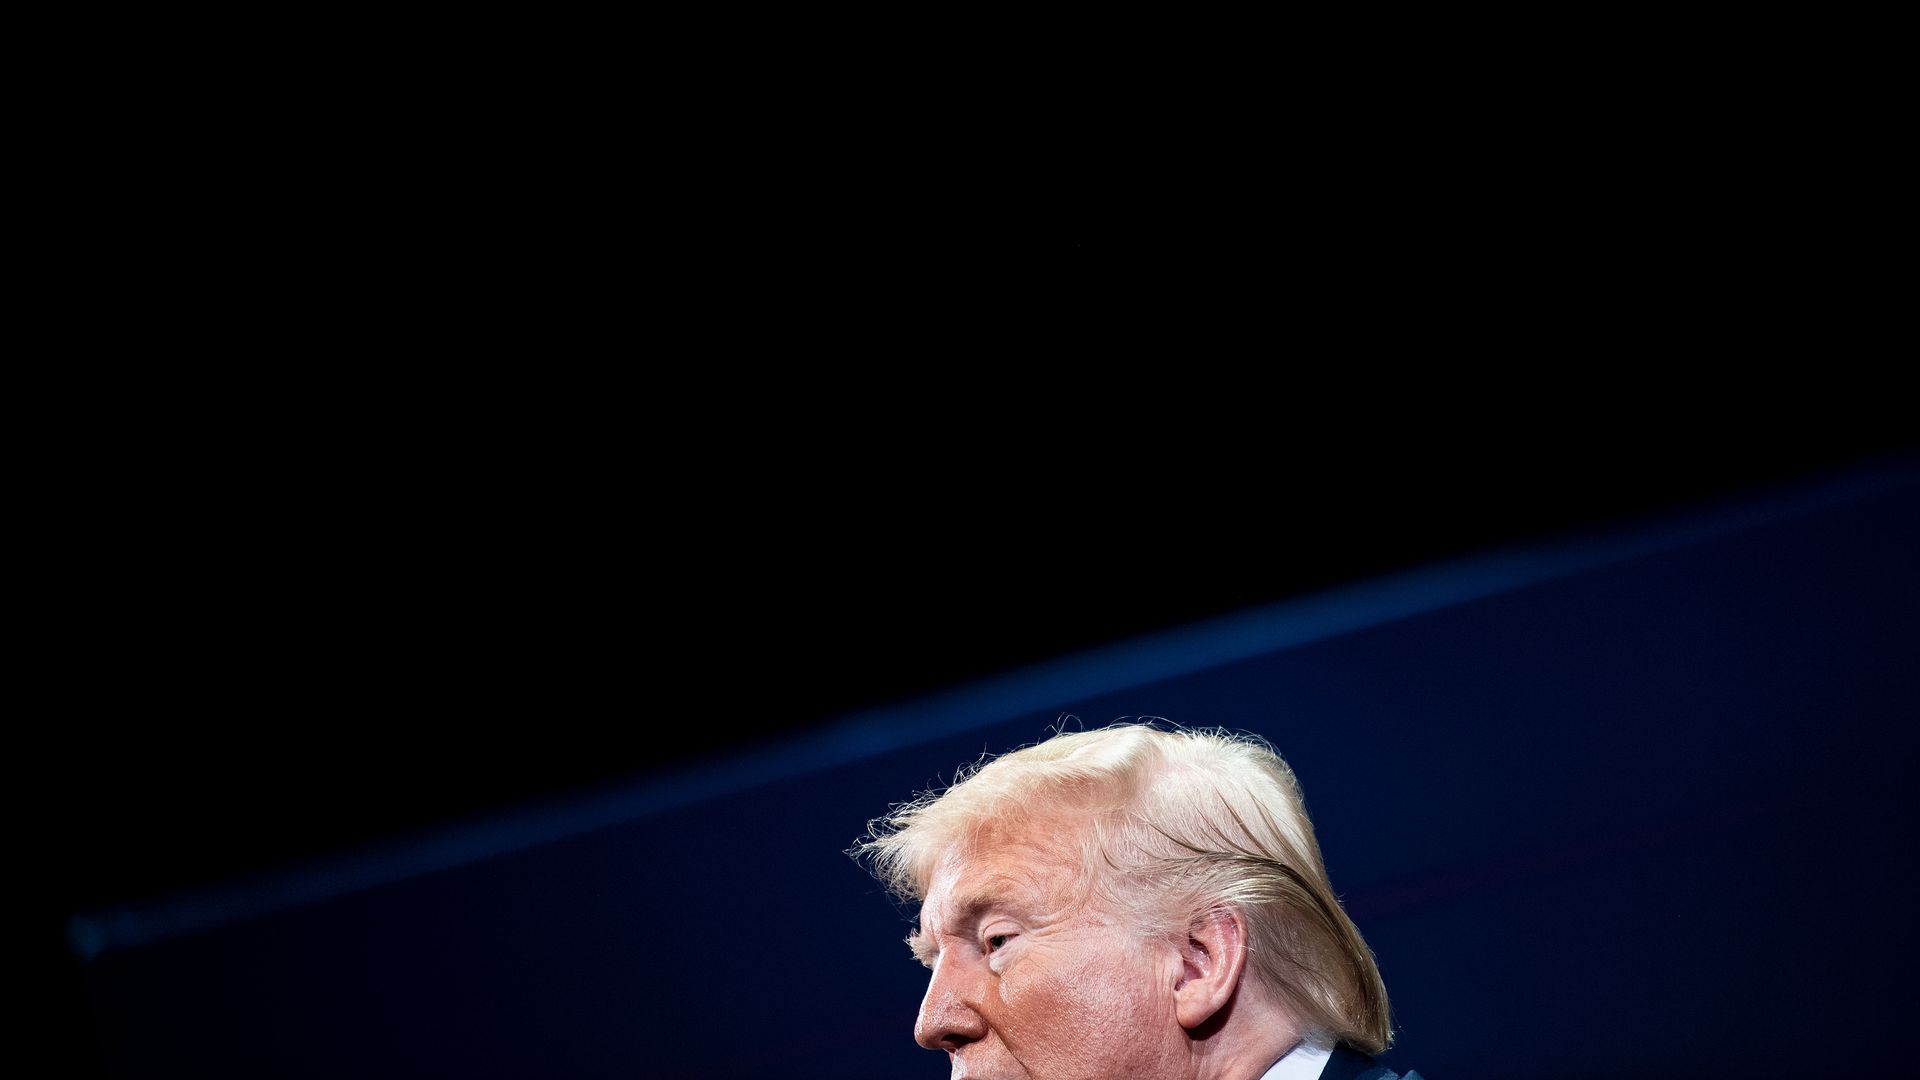 In this image, the top of Trump's head is visible against a dark background